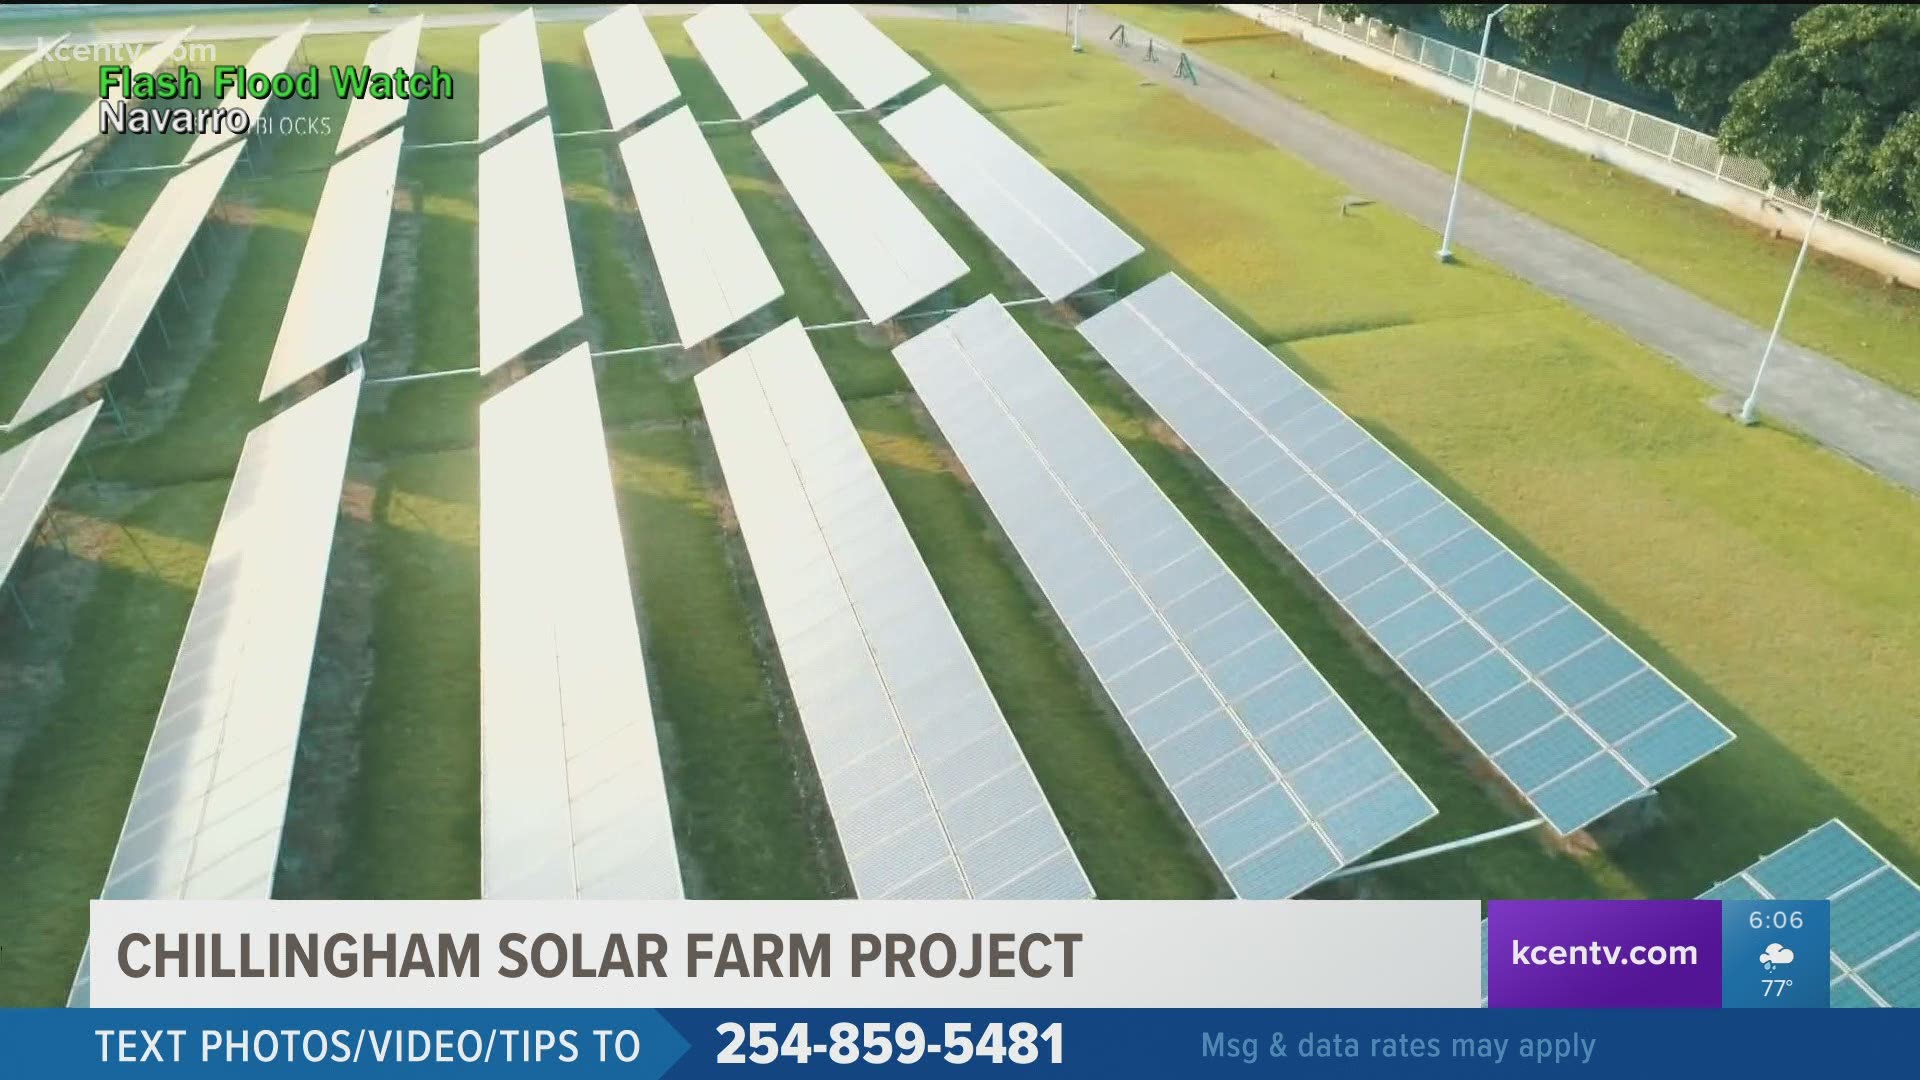 The solar farm is expected to be completed and operational by the end of 2023.